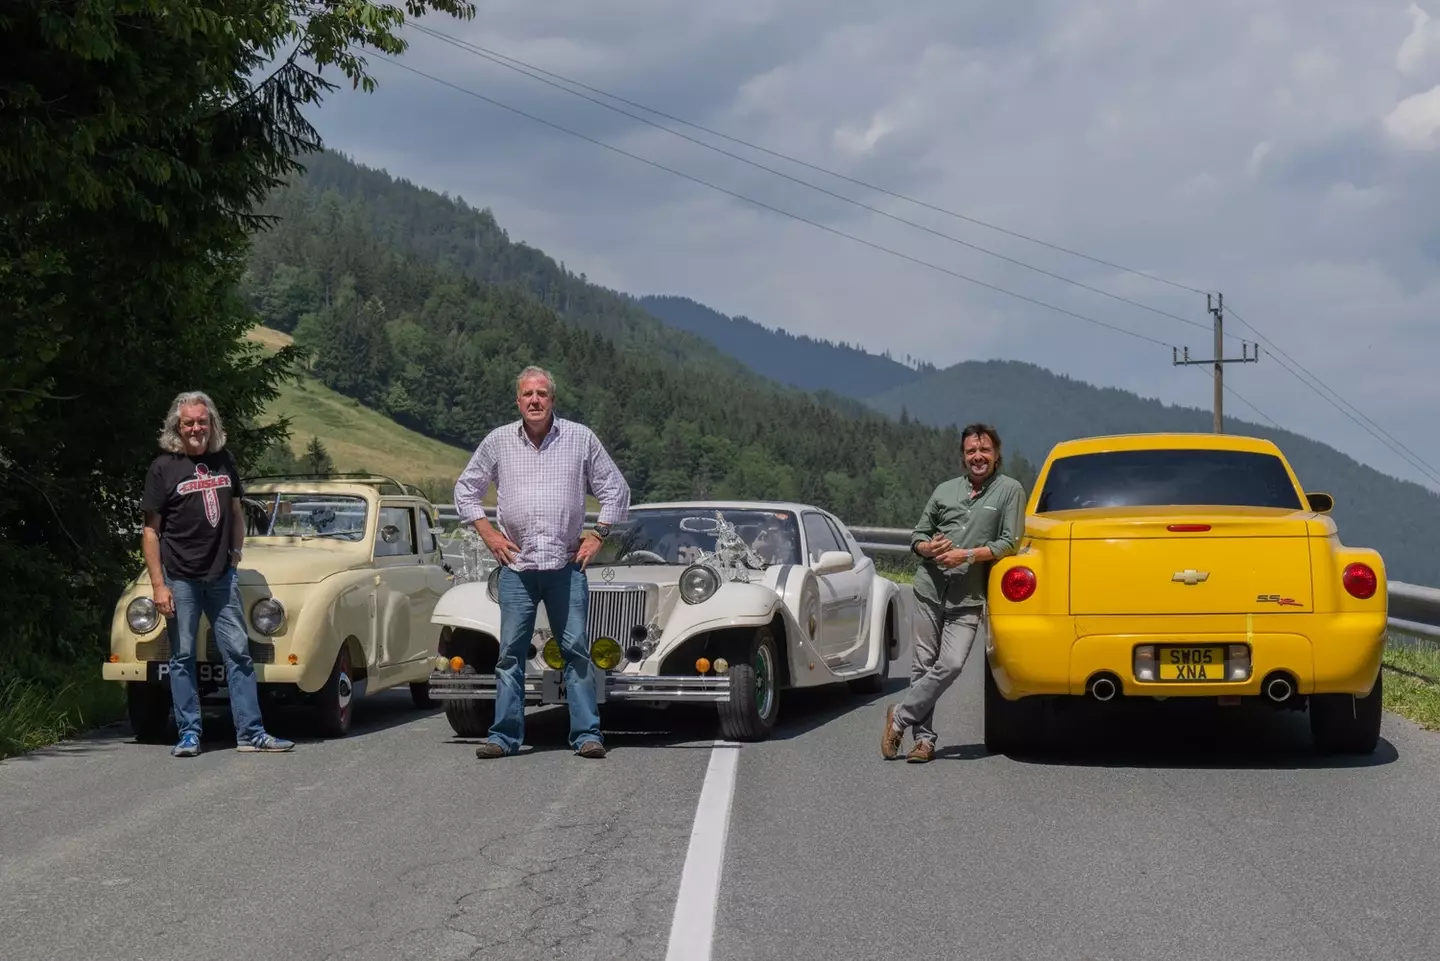 The Grand Tour trio are back for another adventure in Eurocrash.